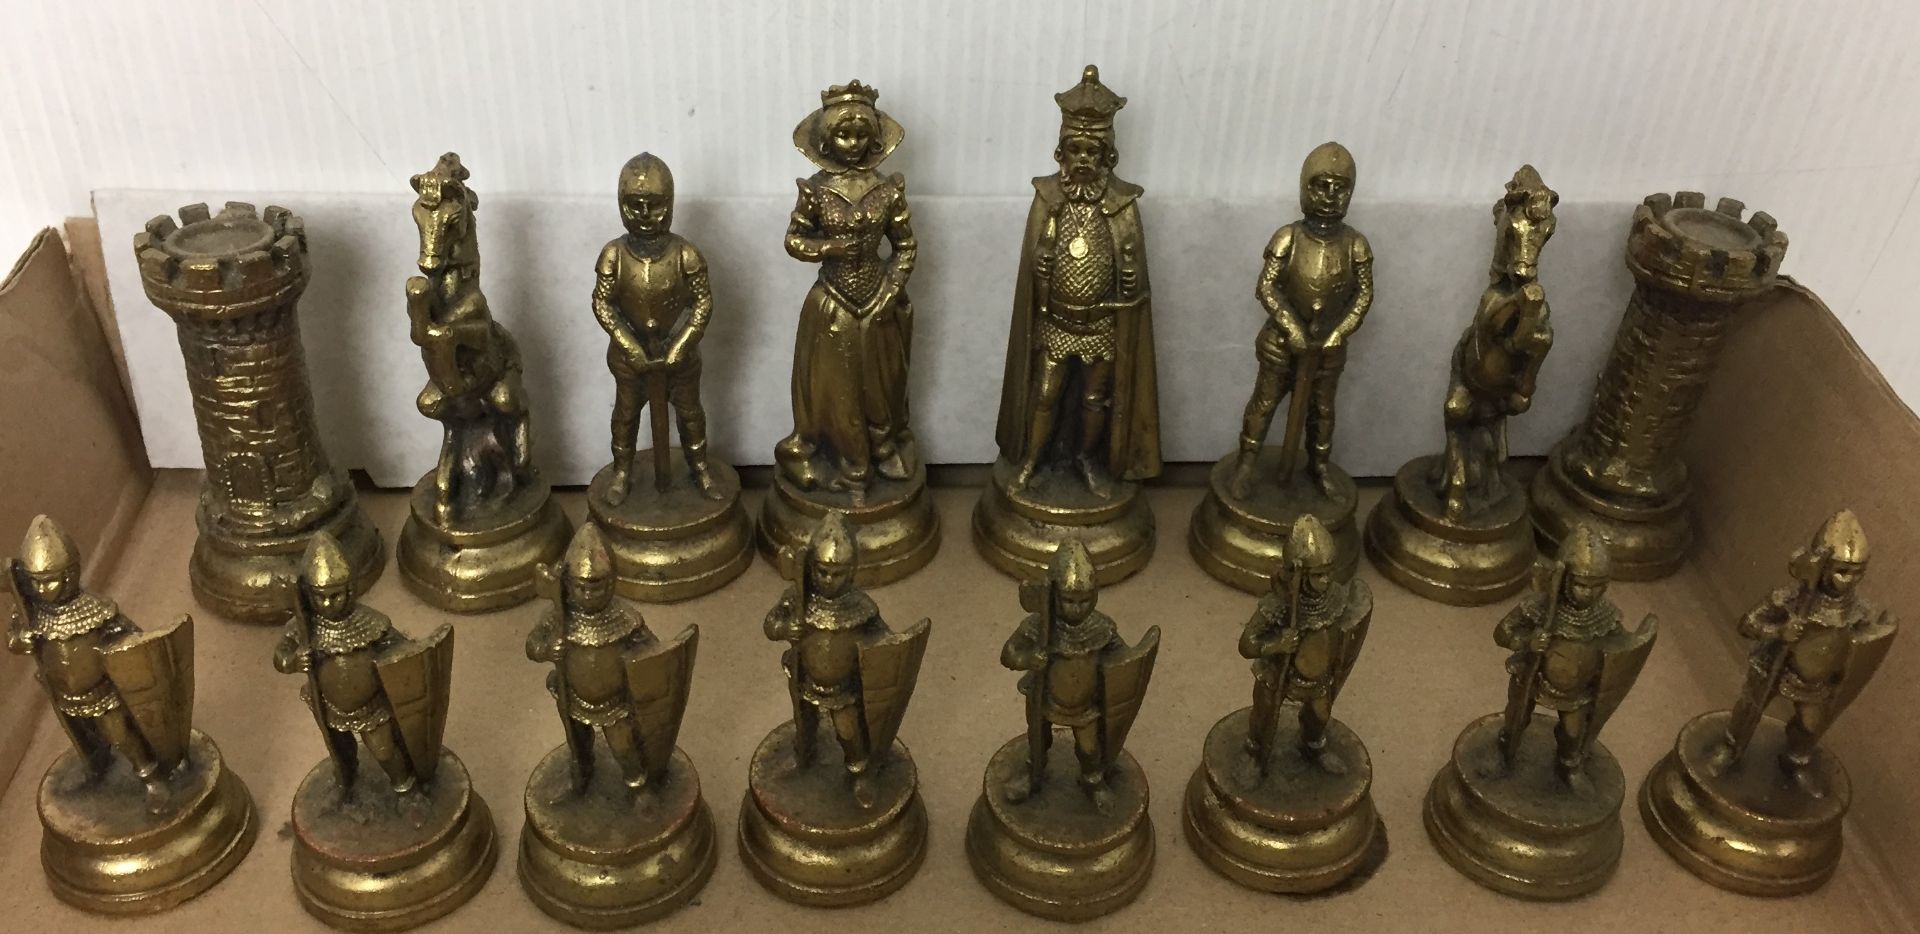 Thirty two piece solid brass chess set - the king is 10cm high S03 - Image 2 of 3